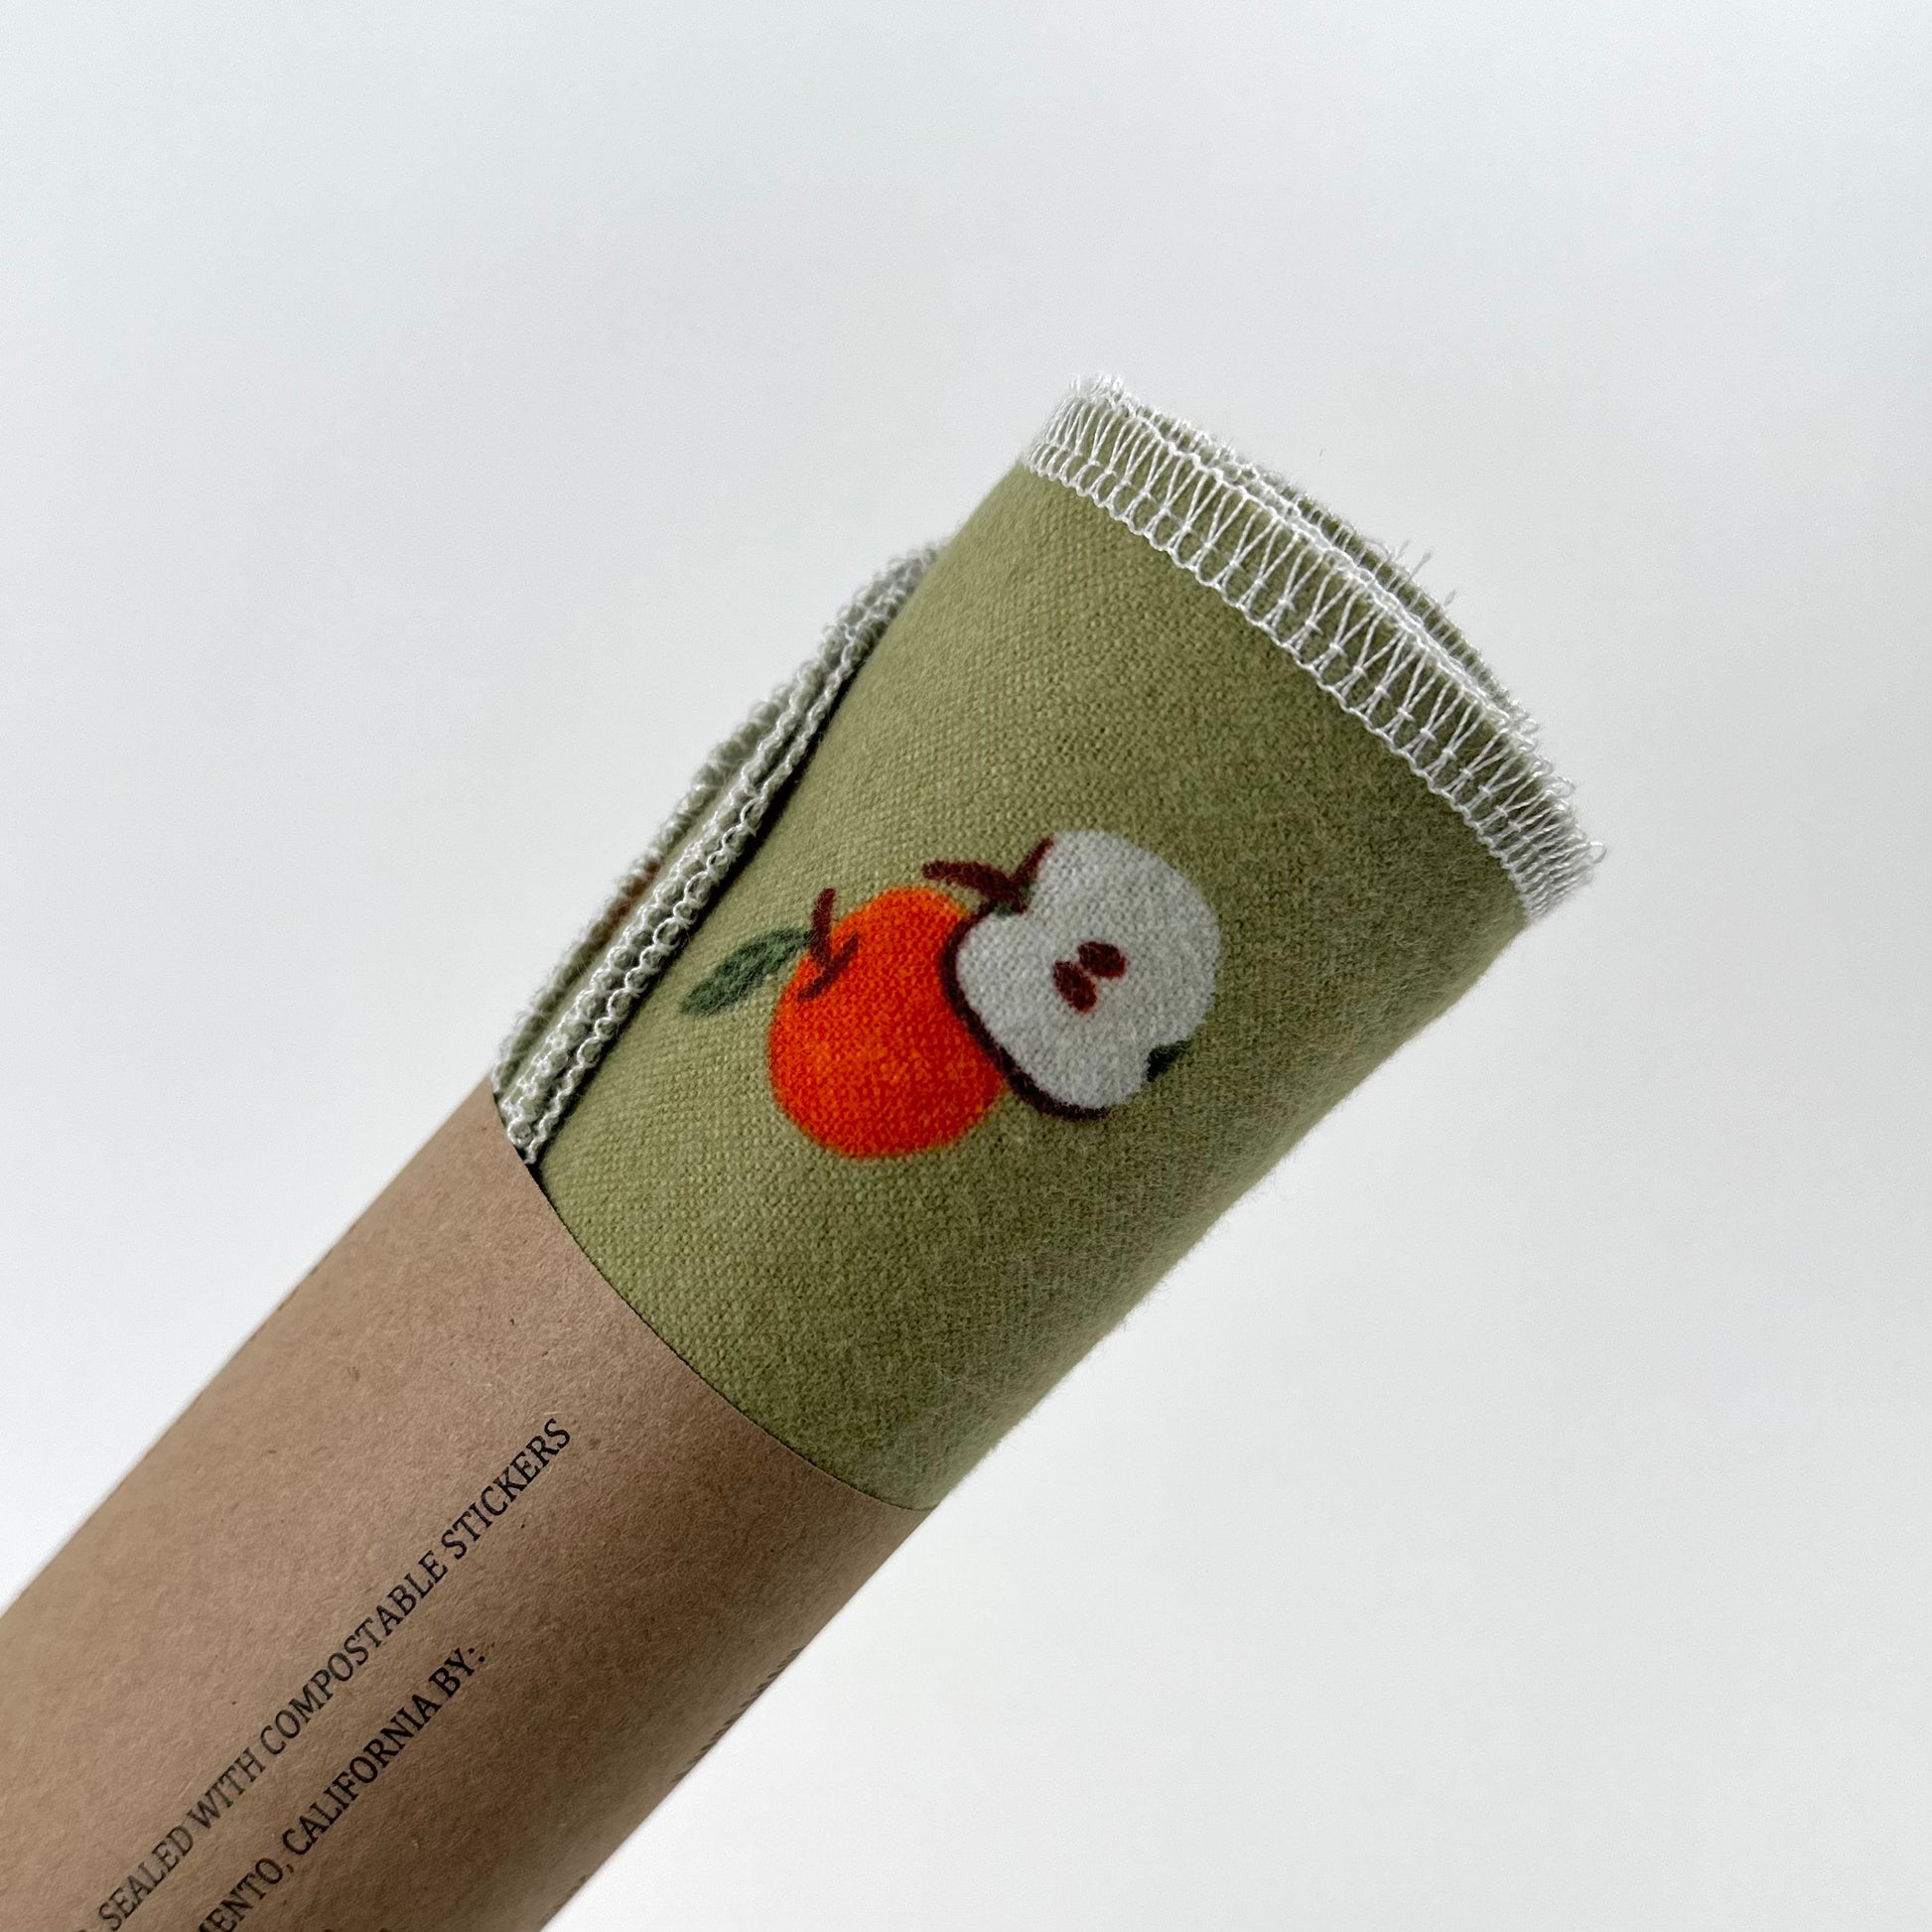 A vibrant green felt roll with a juicy apple printed on it - part of the Miche Niche Reusable paper towels collection.